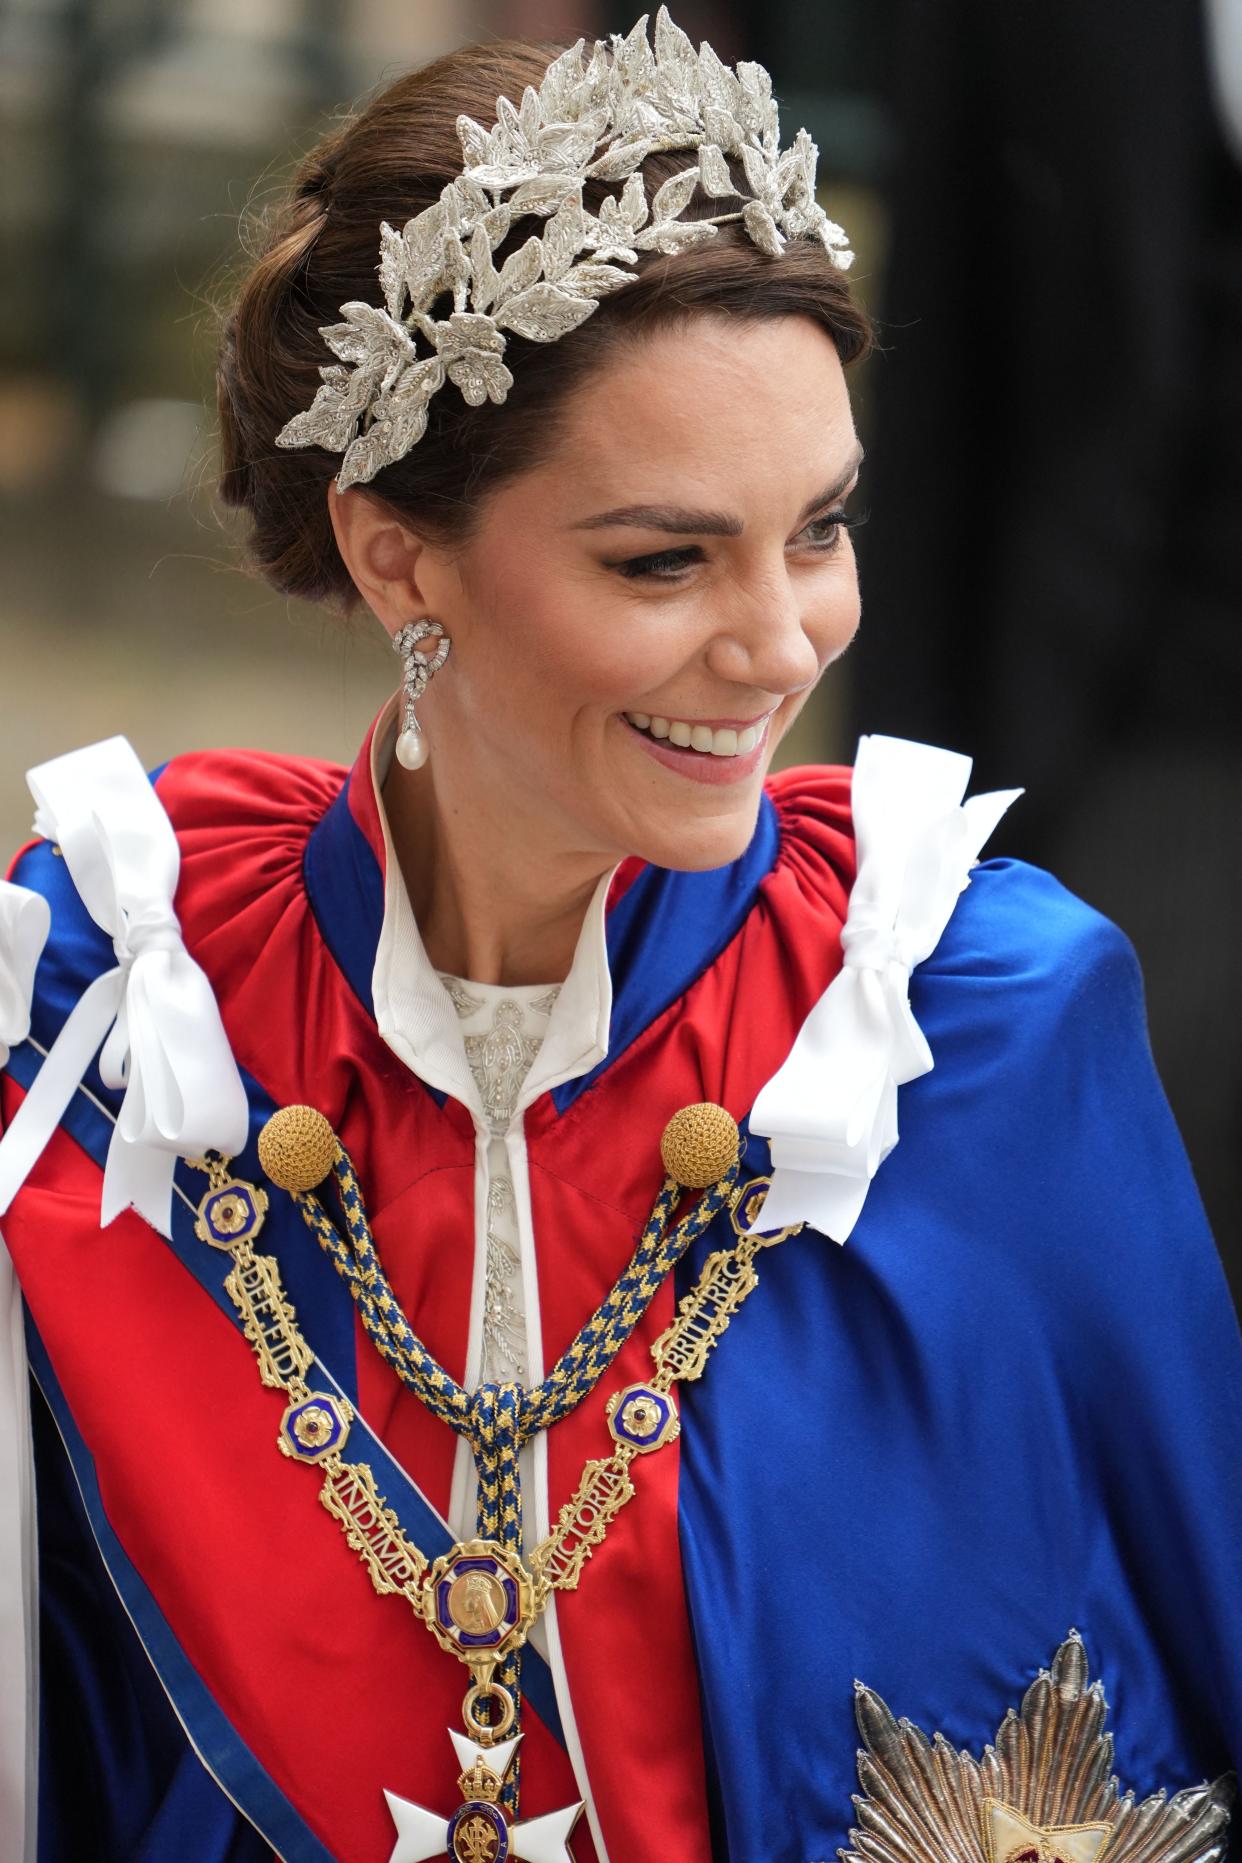 Catherine, Princess of Wales wore the late Queen&#39;s George VI Festoon necklace under her ceremonial robes. (Photo: DAN CHARITY/POOL/AFP via Getty Images)